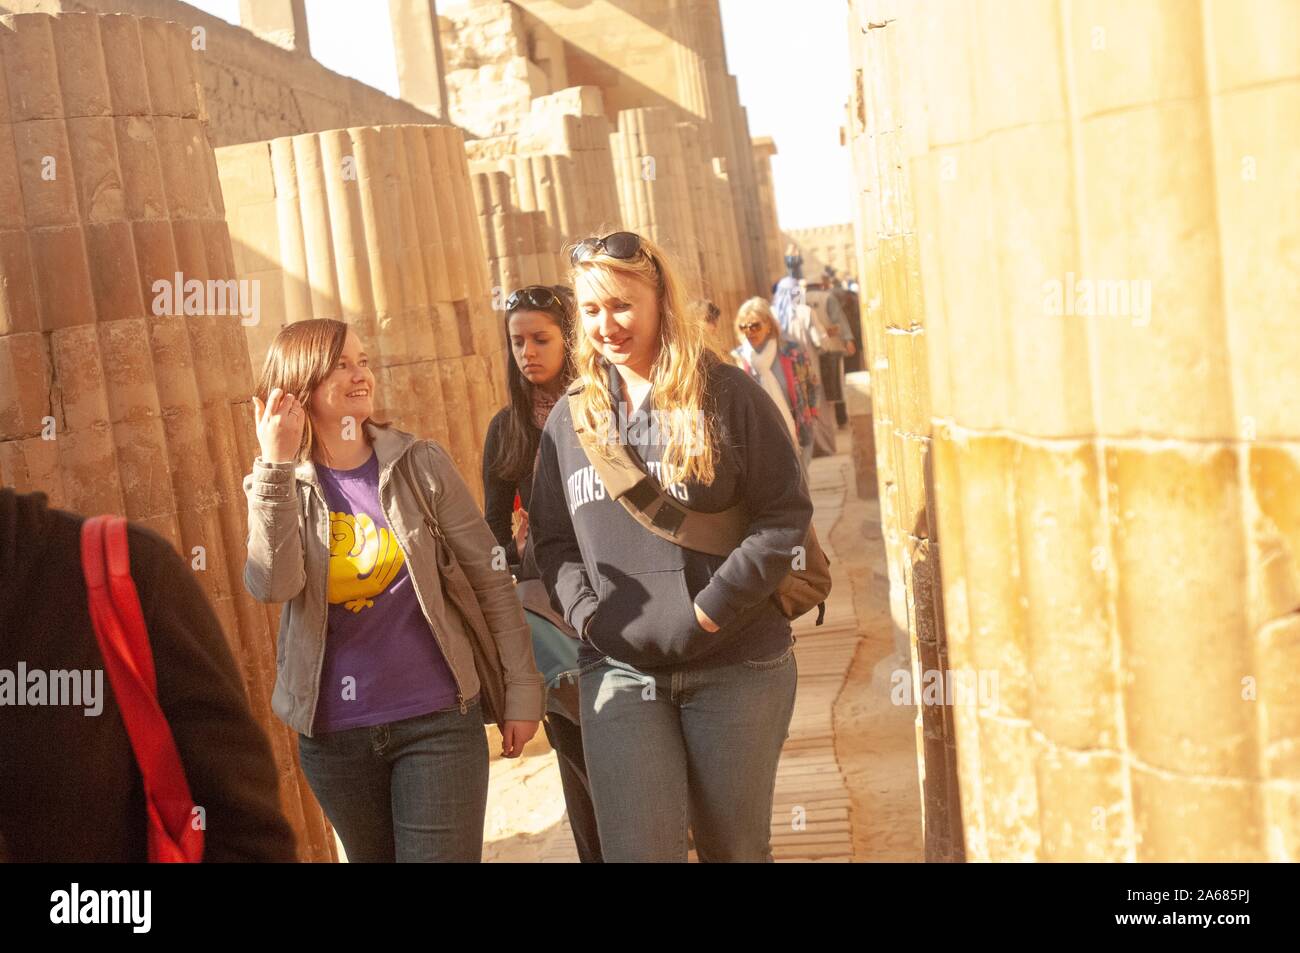 Two Johns Hopkins University students, smiling as they walk along a sunny path, in between massive fluted columns, Giza, Egypt during a study abroad program, January 6, 2008. From the Homewood Photography Collection. () Stock Photo